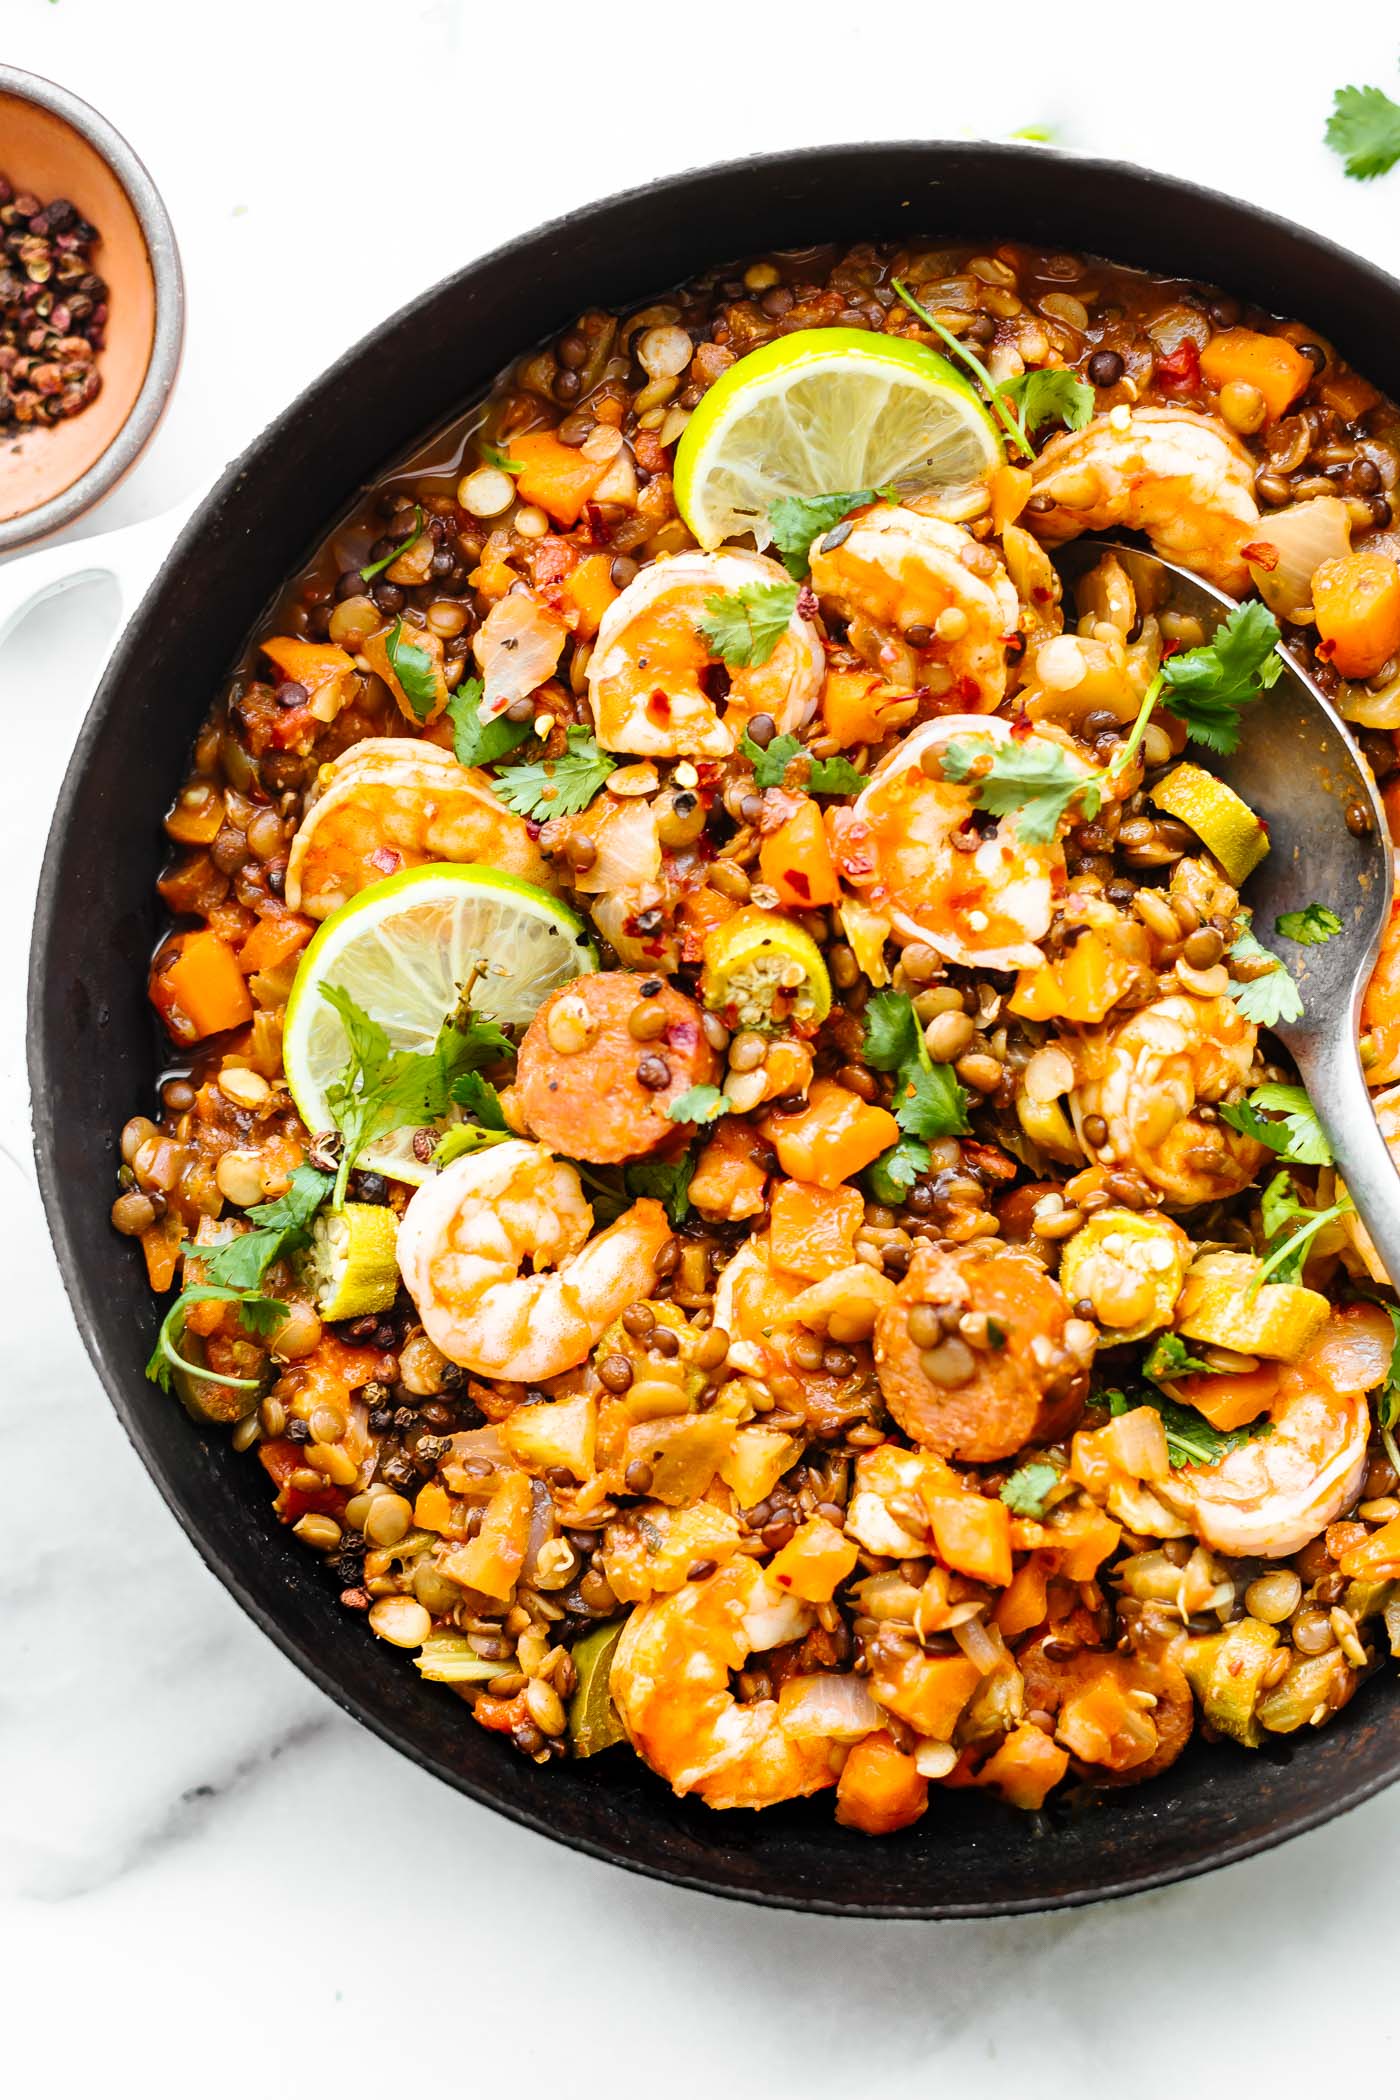 Shrimp jambalaya with lentils and sausage in a white skillet